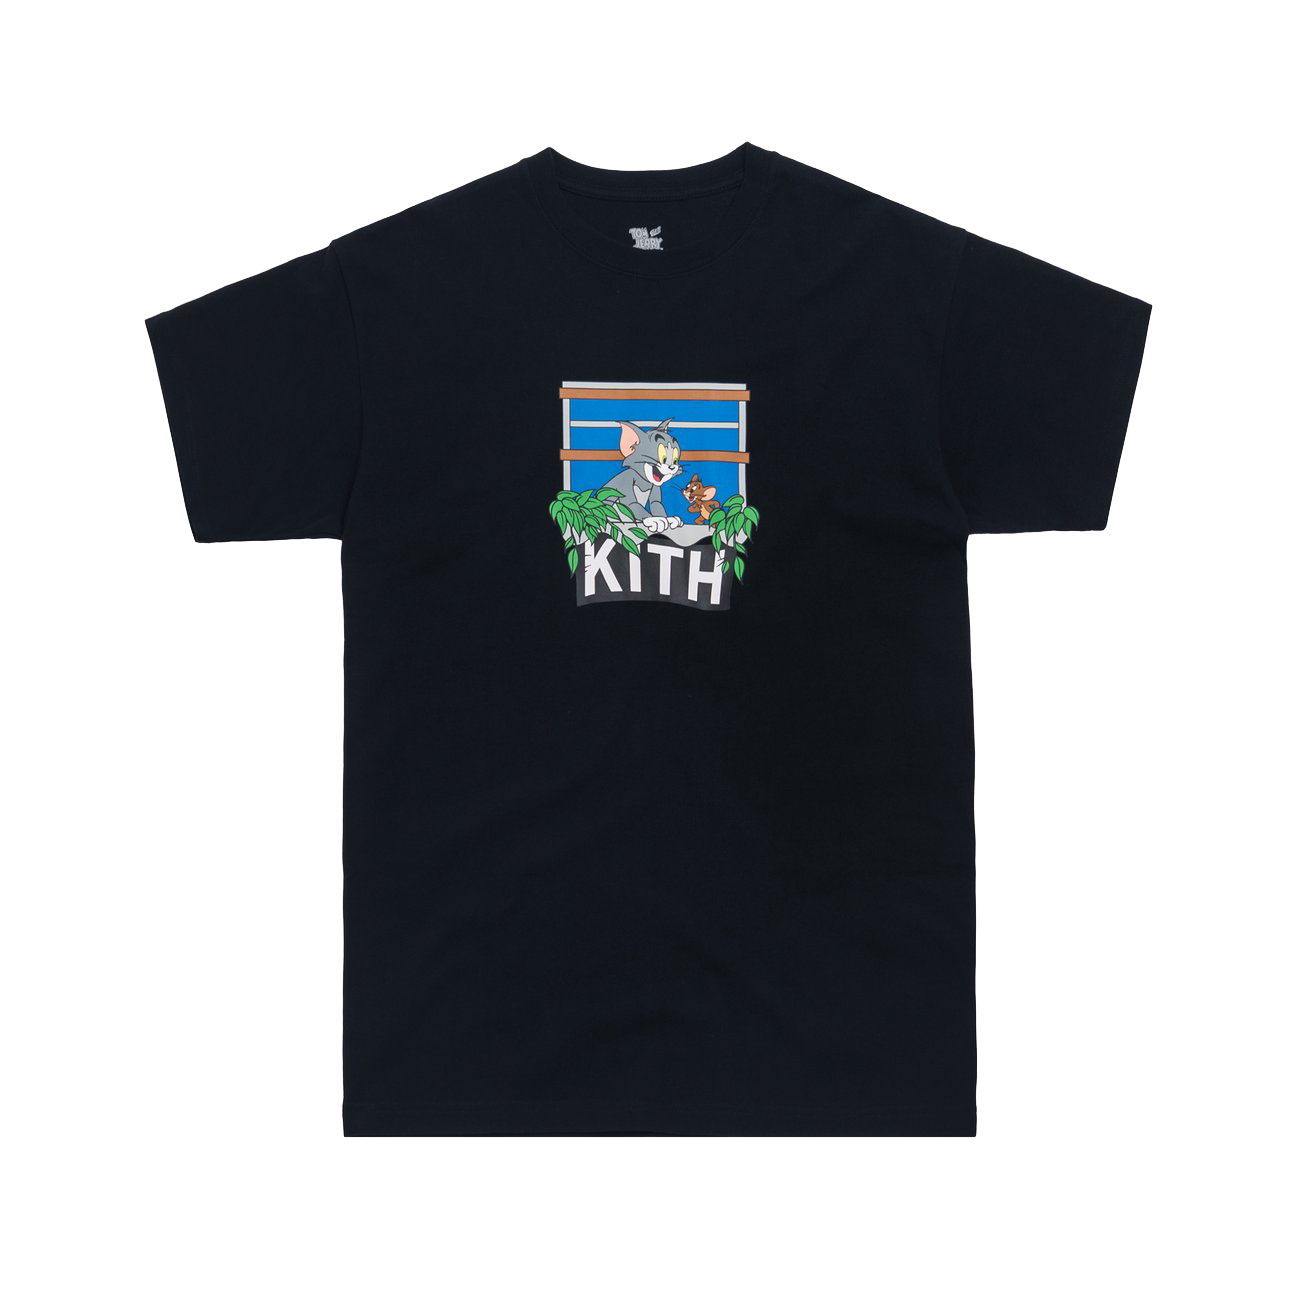 Kith x Tom u0026 Jerry Hang Out Tee Black Men's - SS19 - US